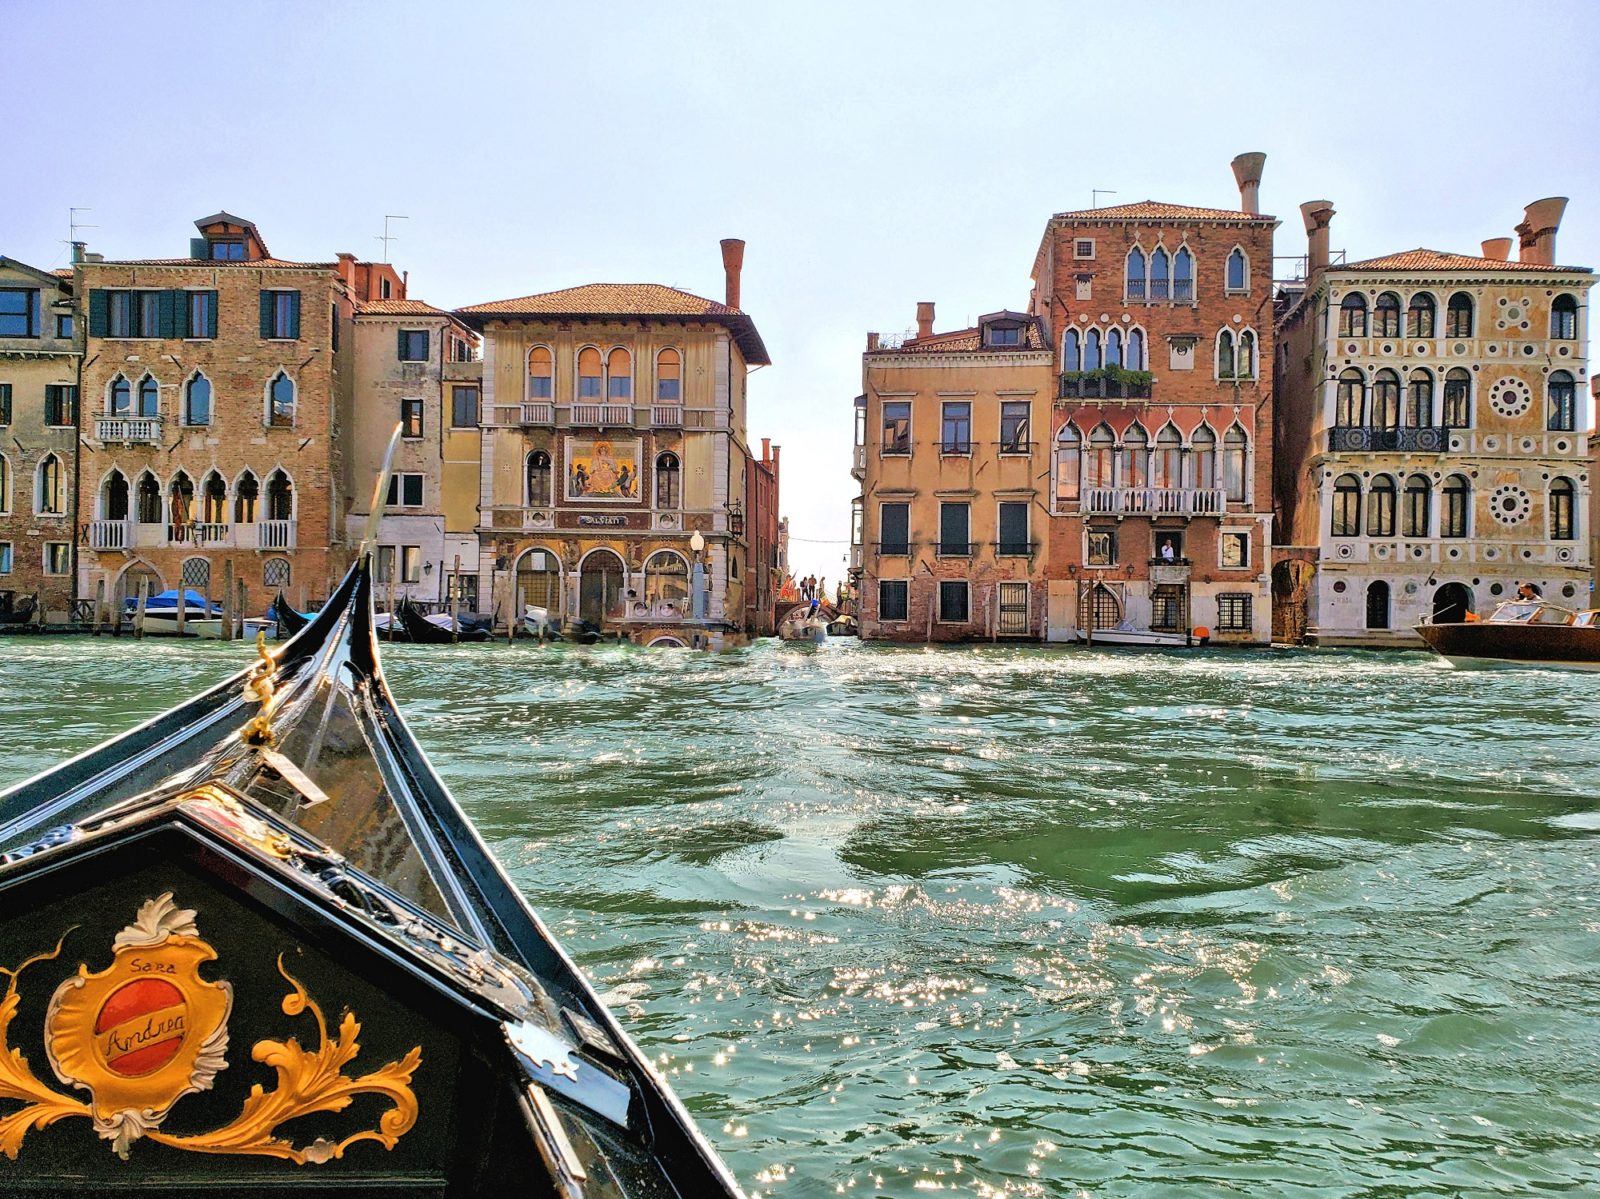 grand canal of Venice Italy